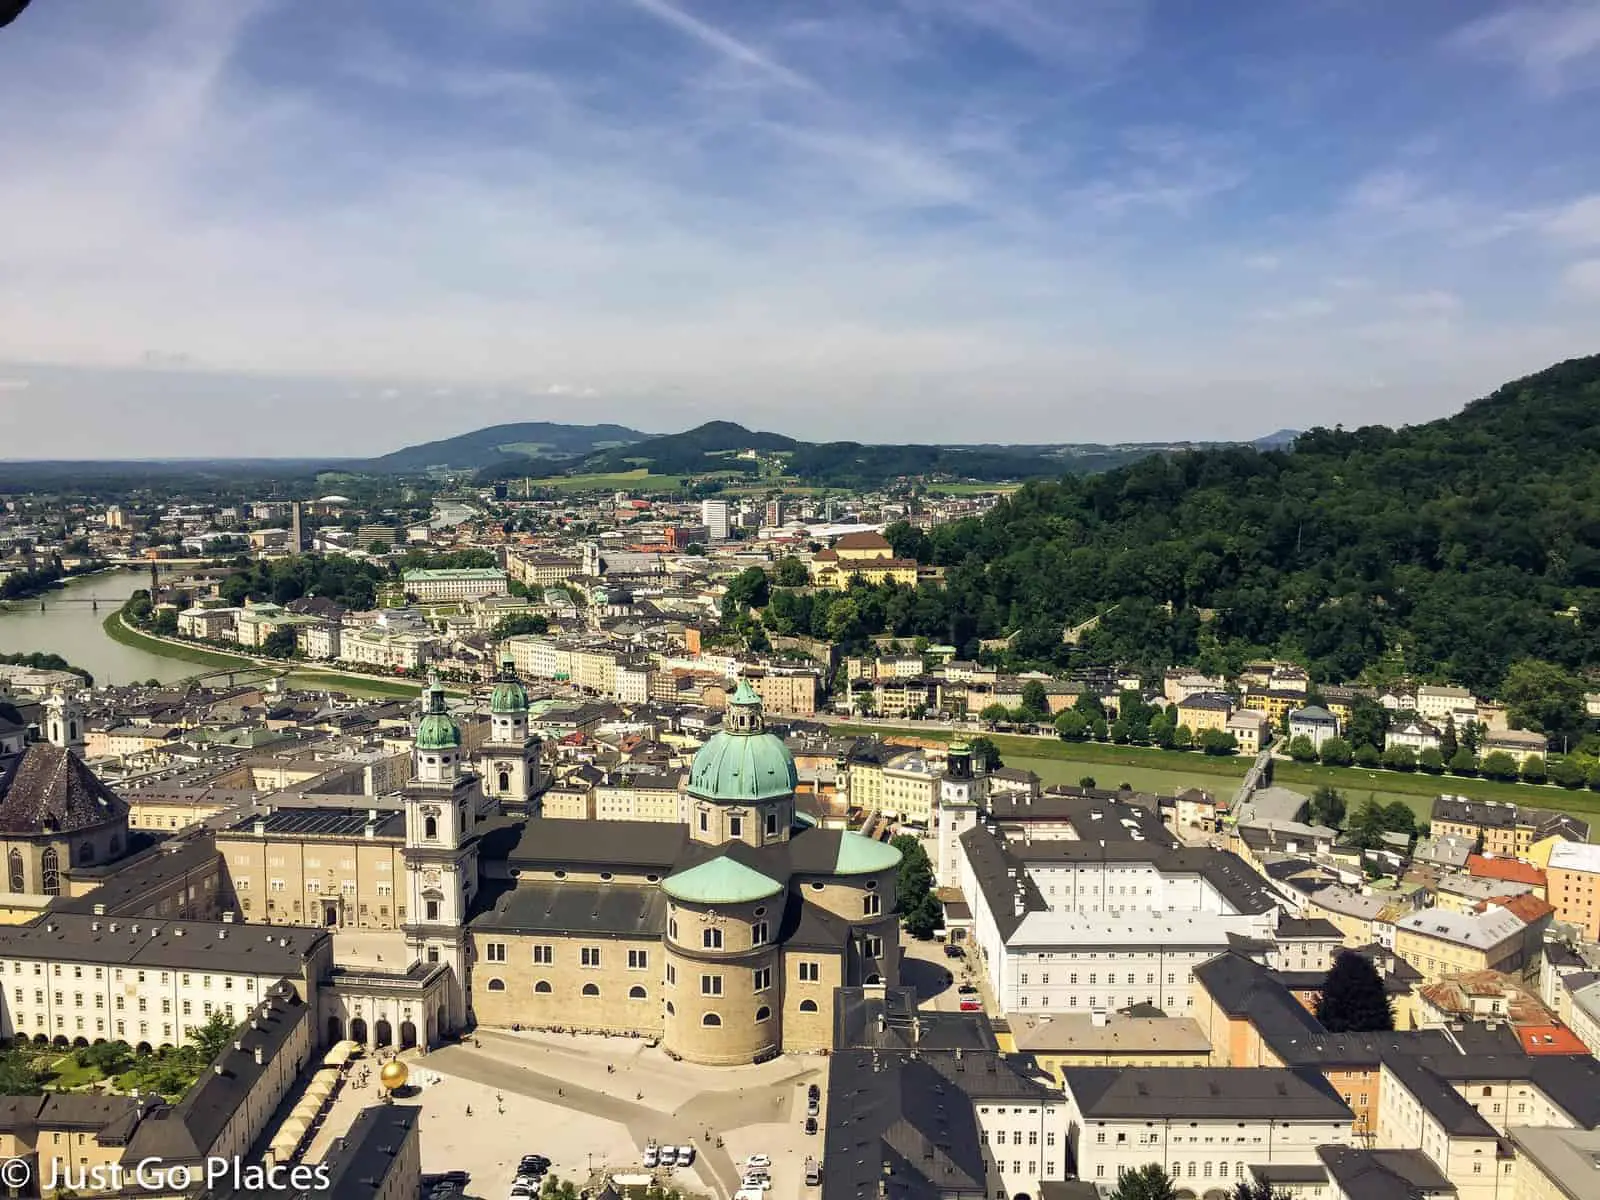 things to do with kids in Salzburg